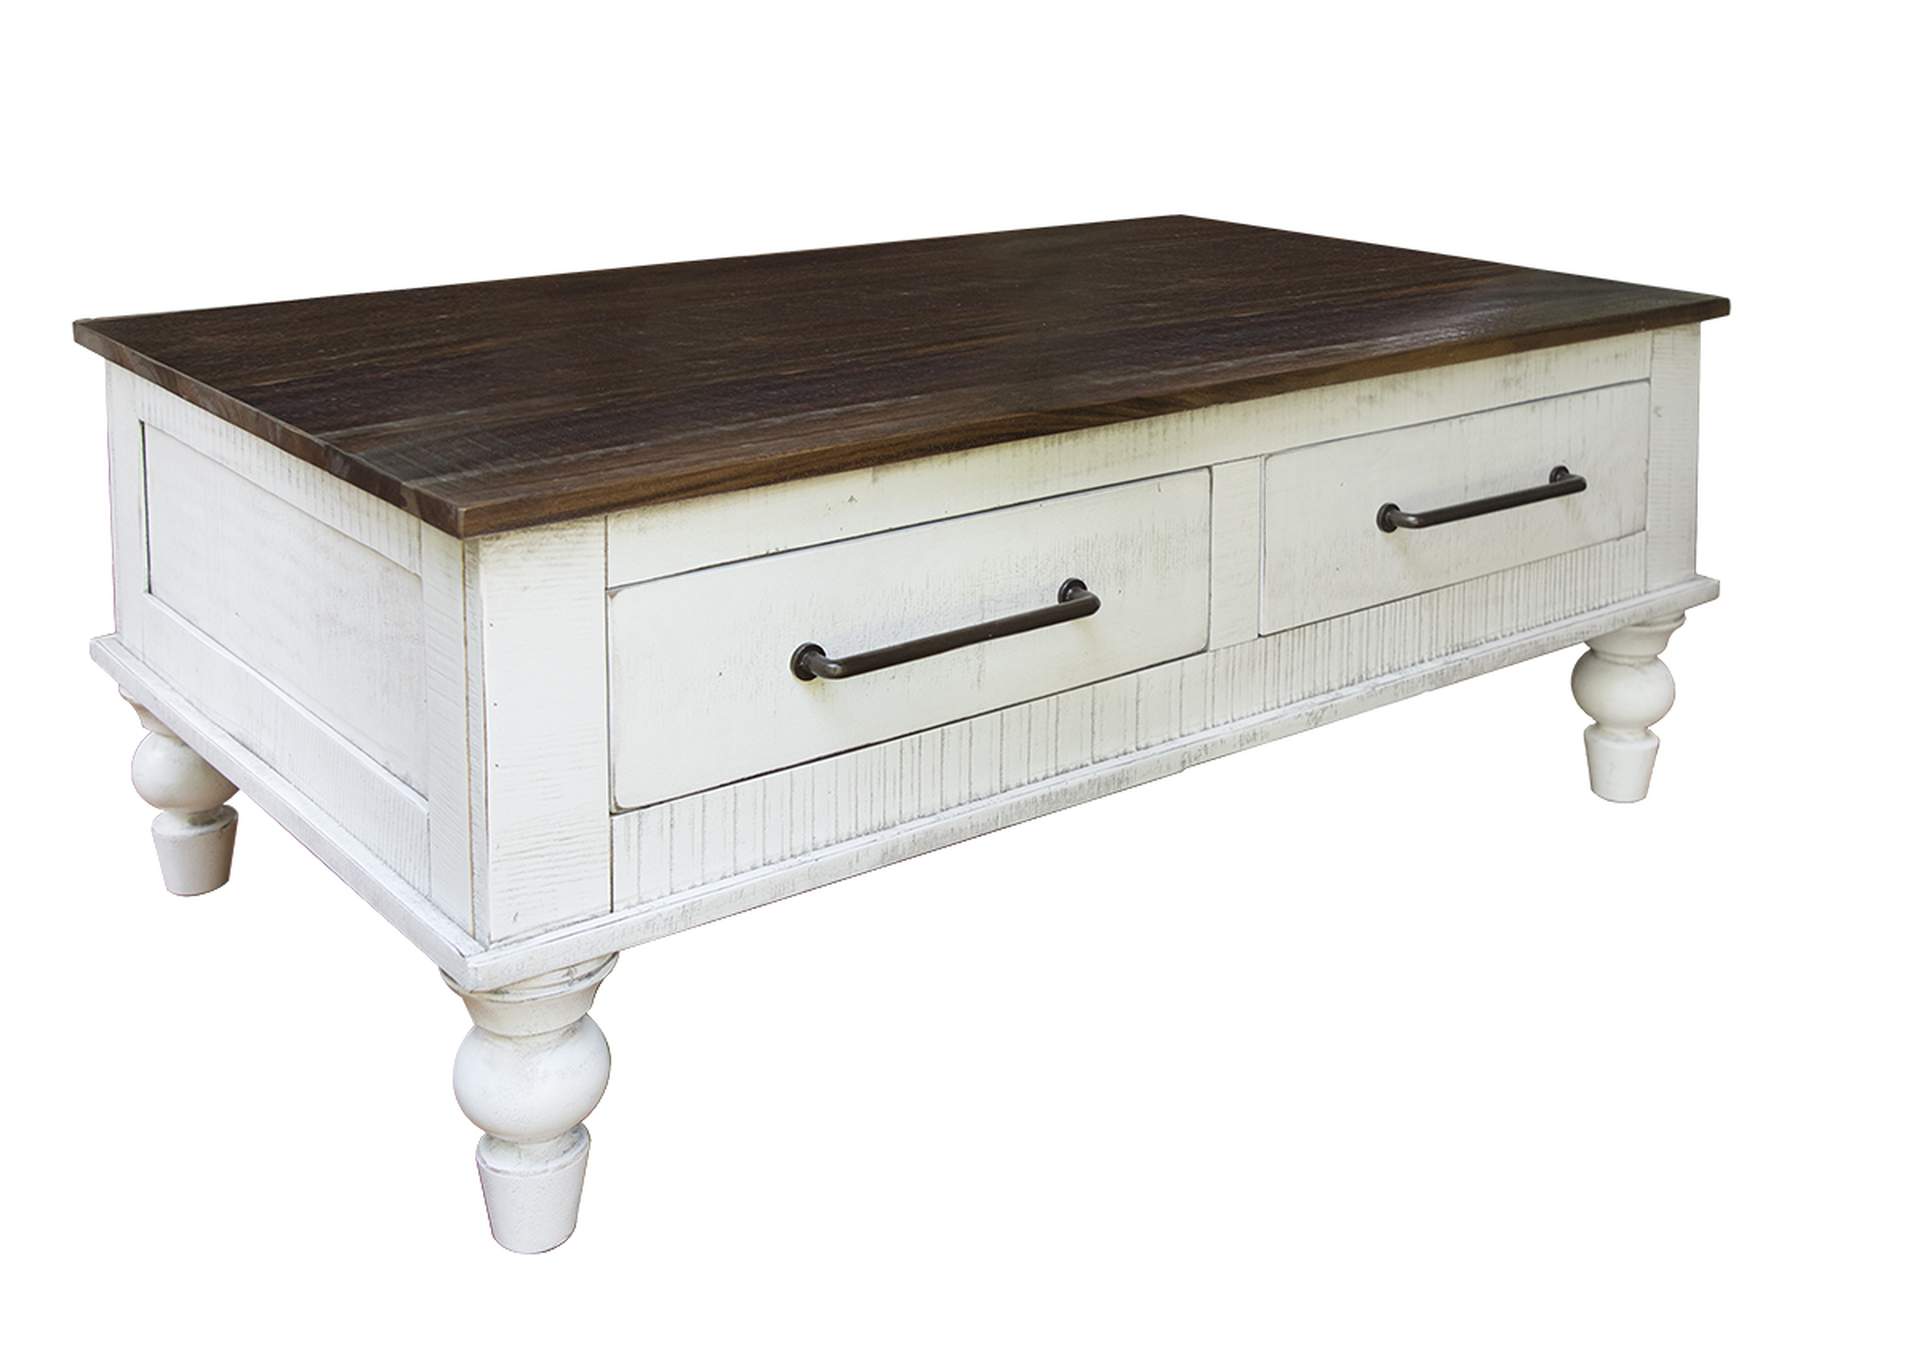 Rock Valley 4 Drawers Cocktail Table,International Furniture Direct